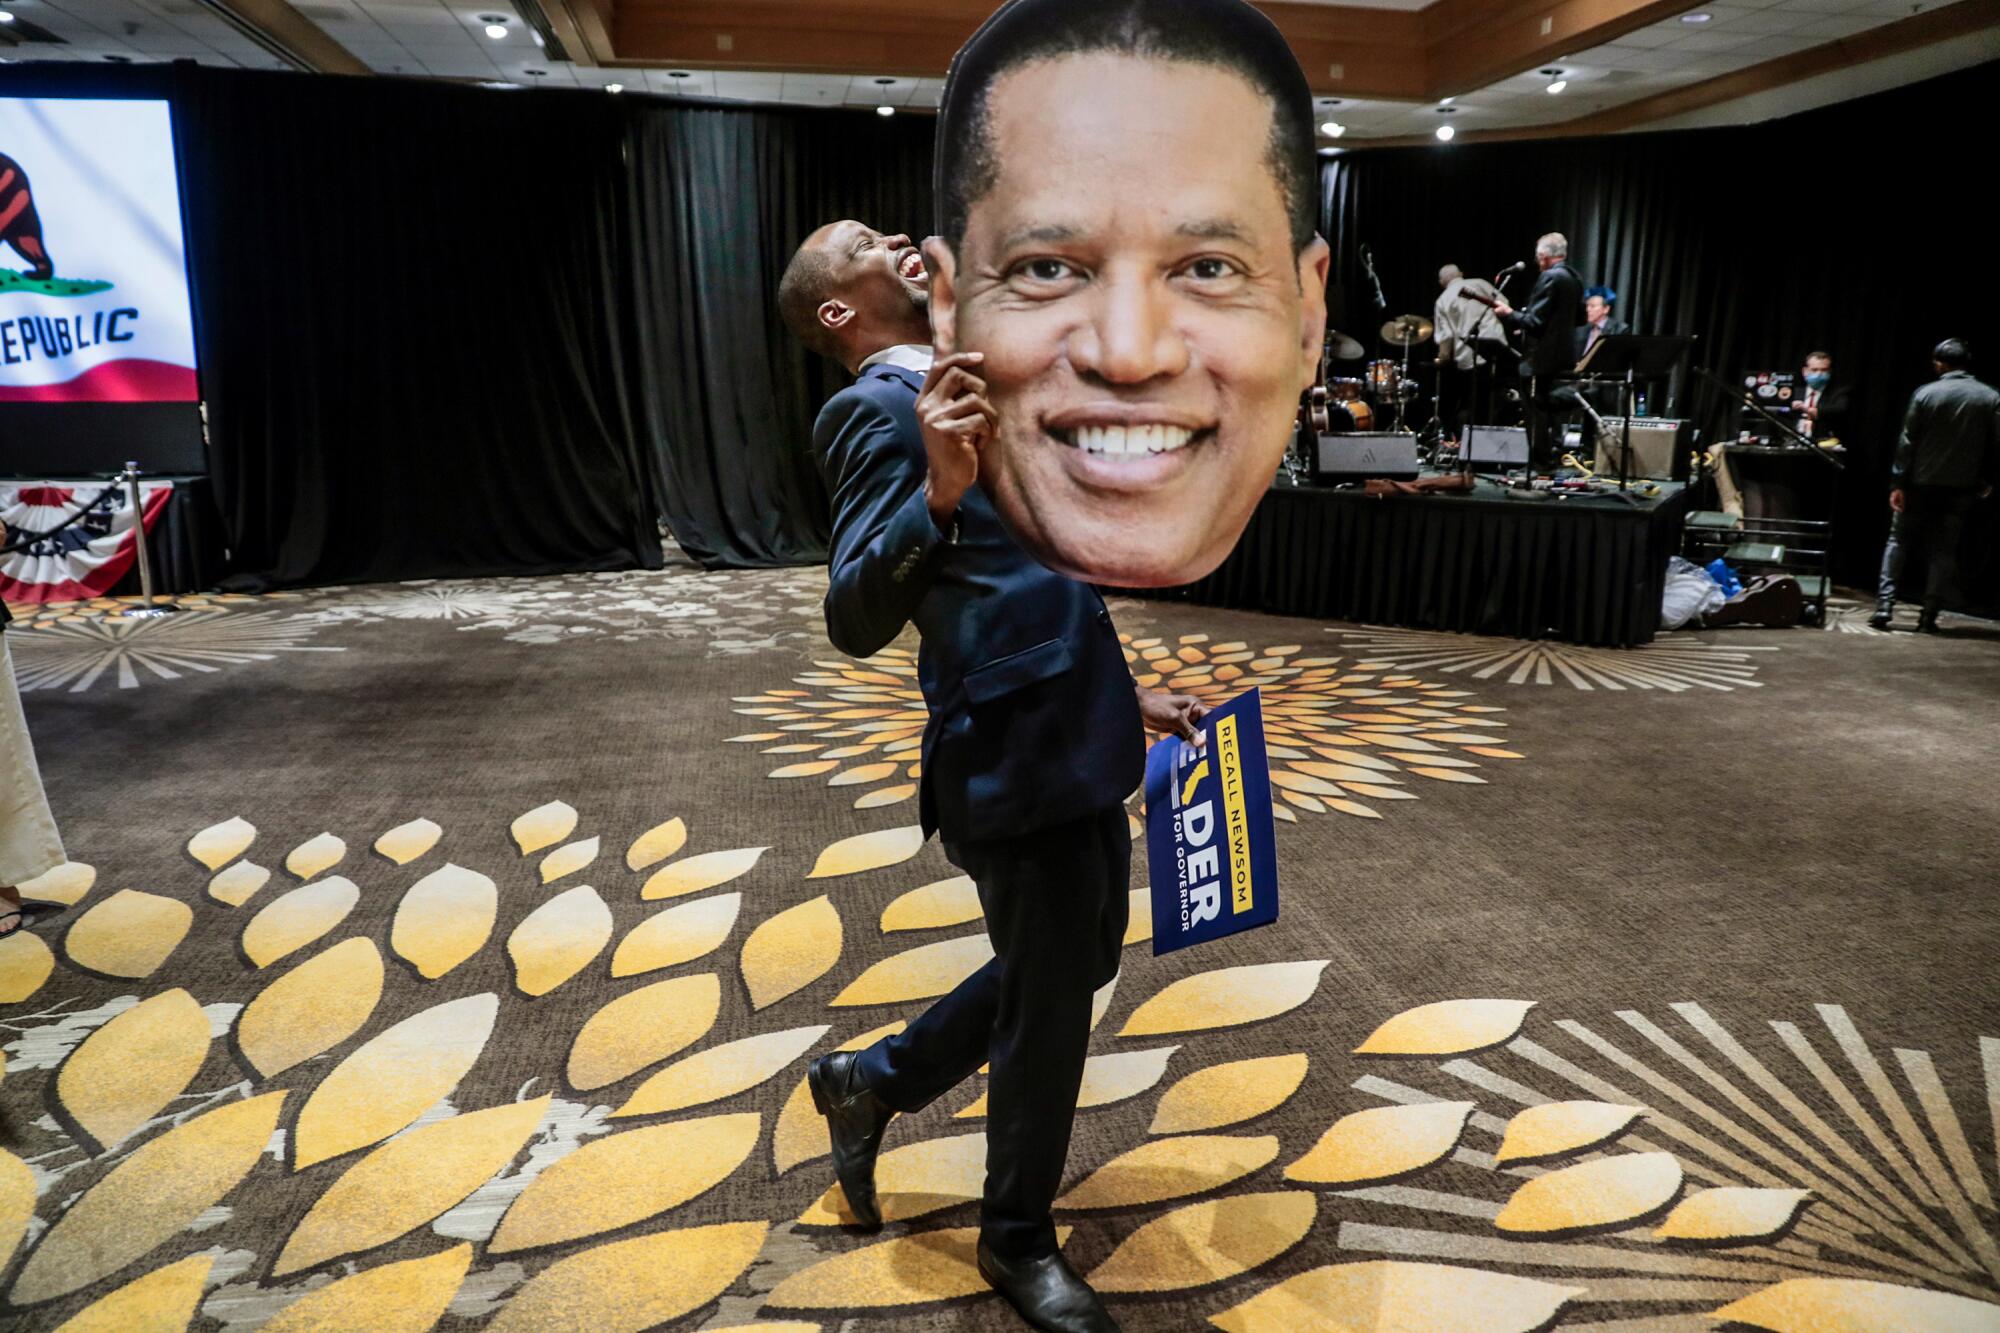 A man in a suit laughs as he displays a large cutout depicting a man's face 